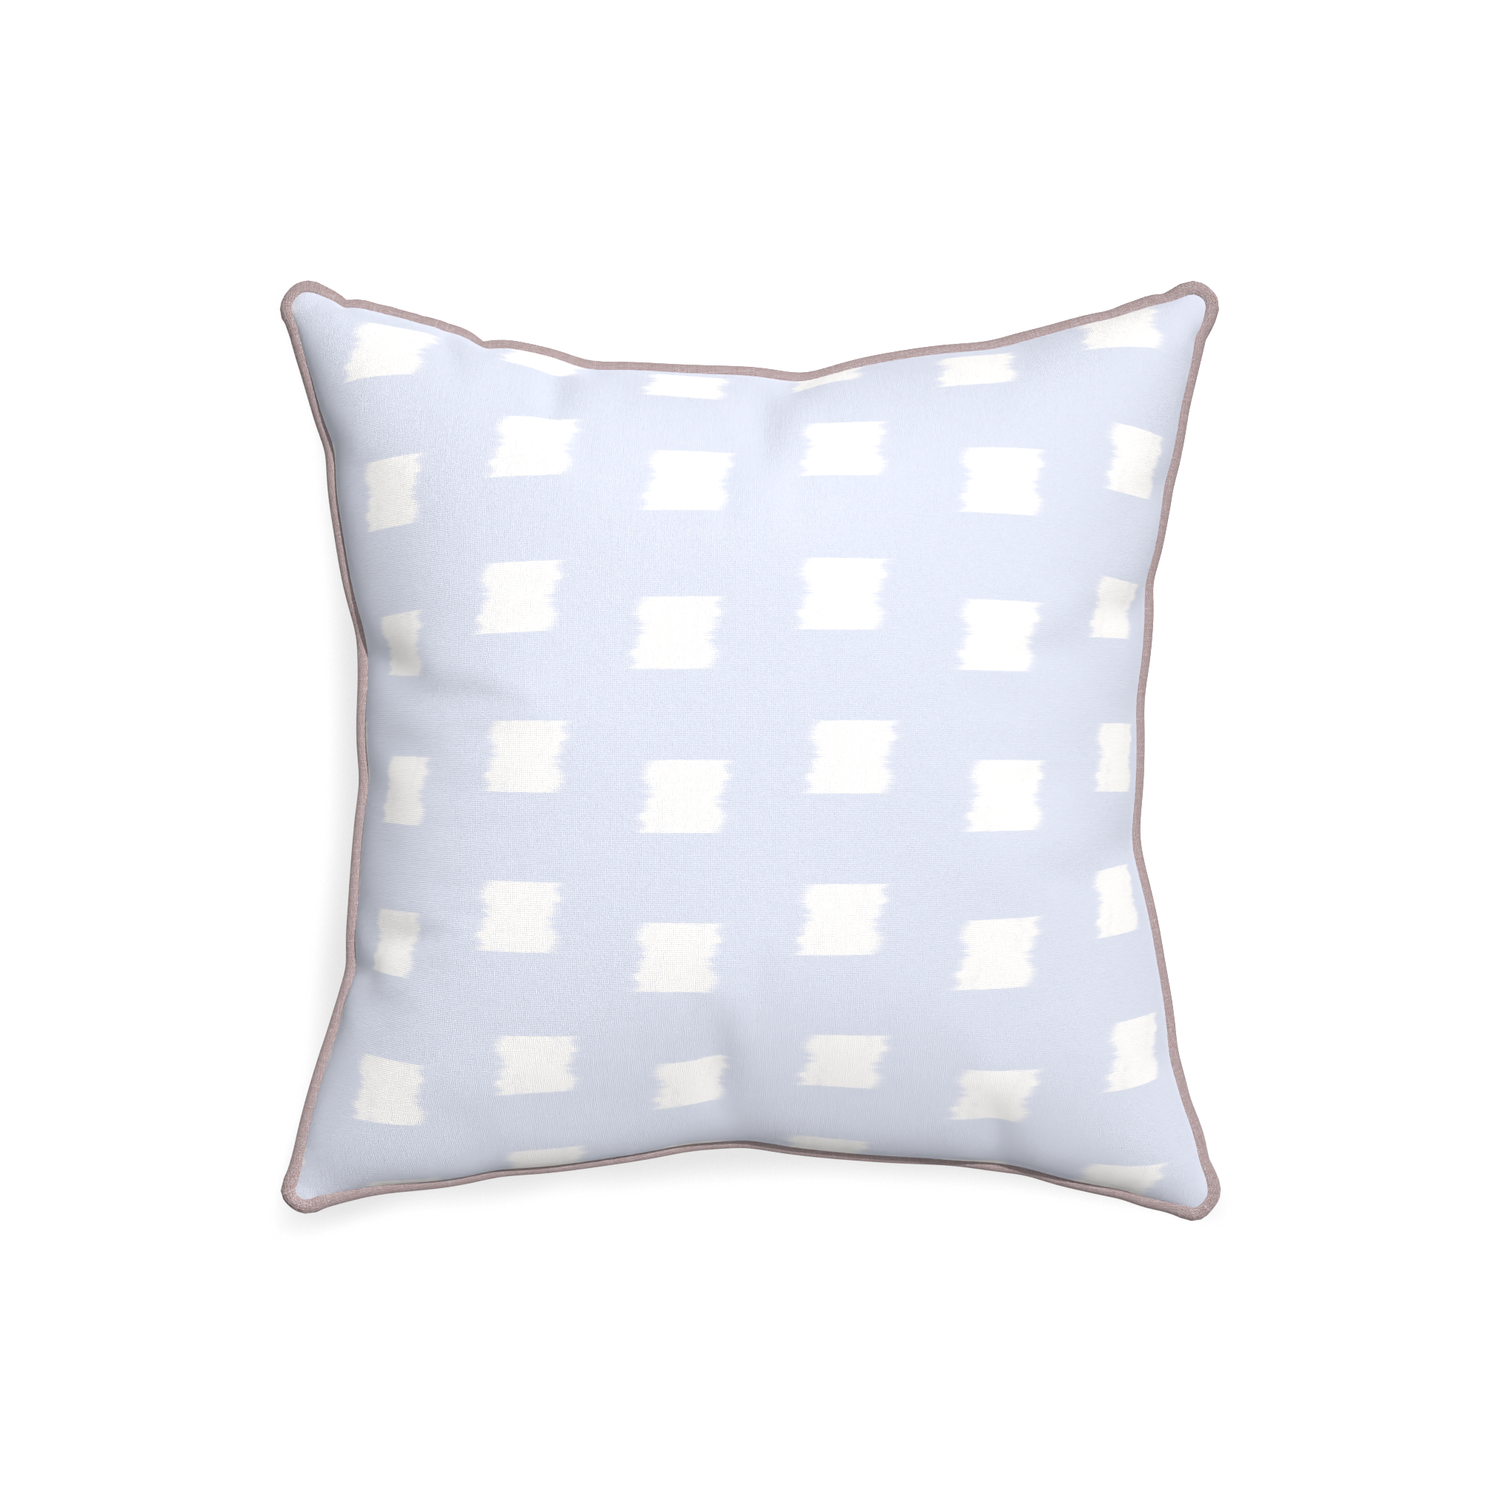 20-square denton custom sky blue patternpillow with orchid piping on white background